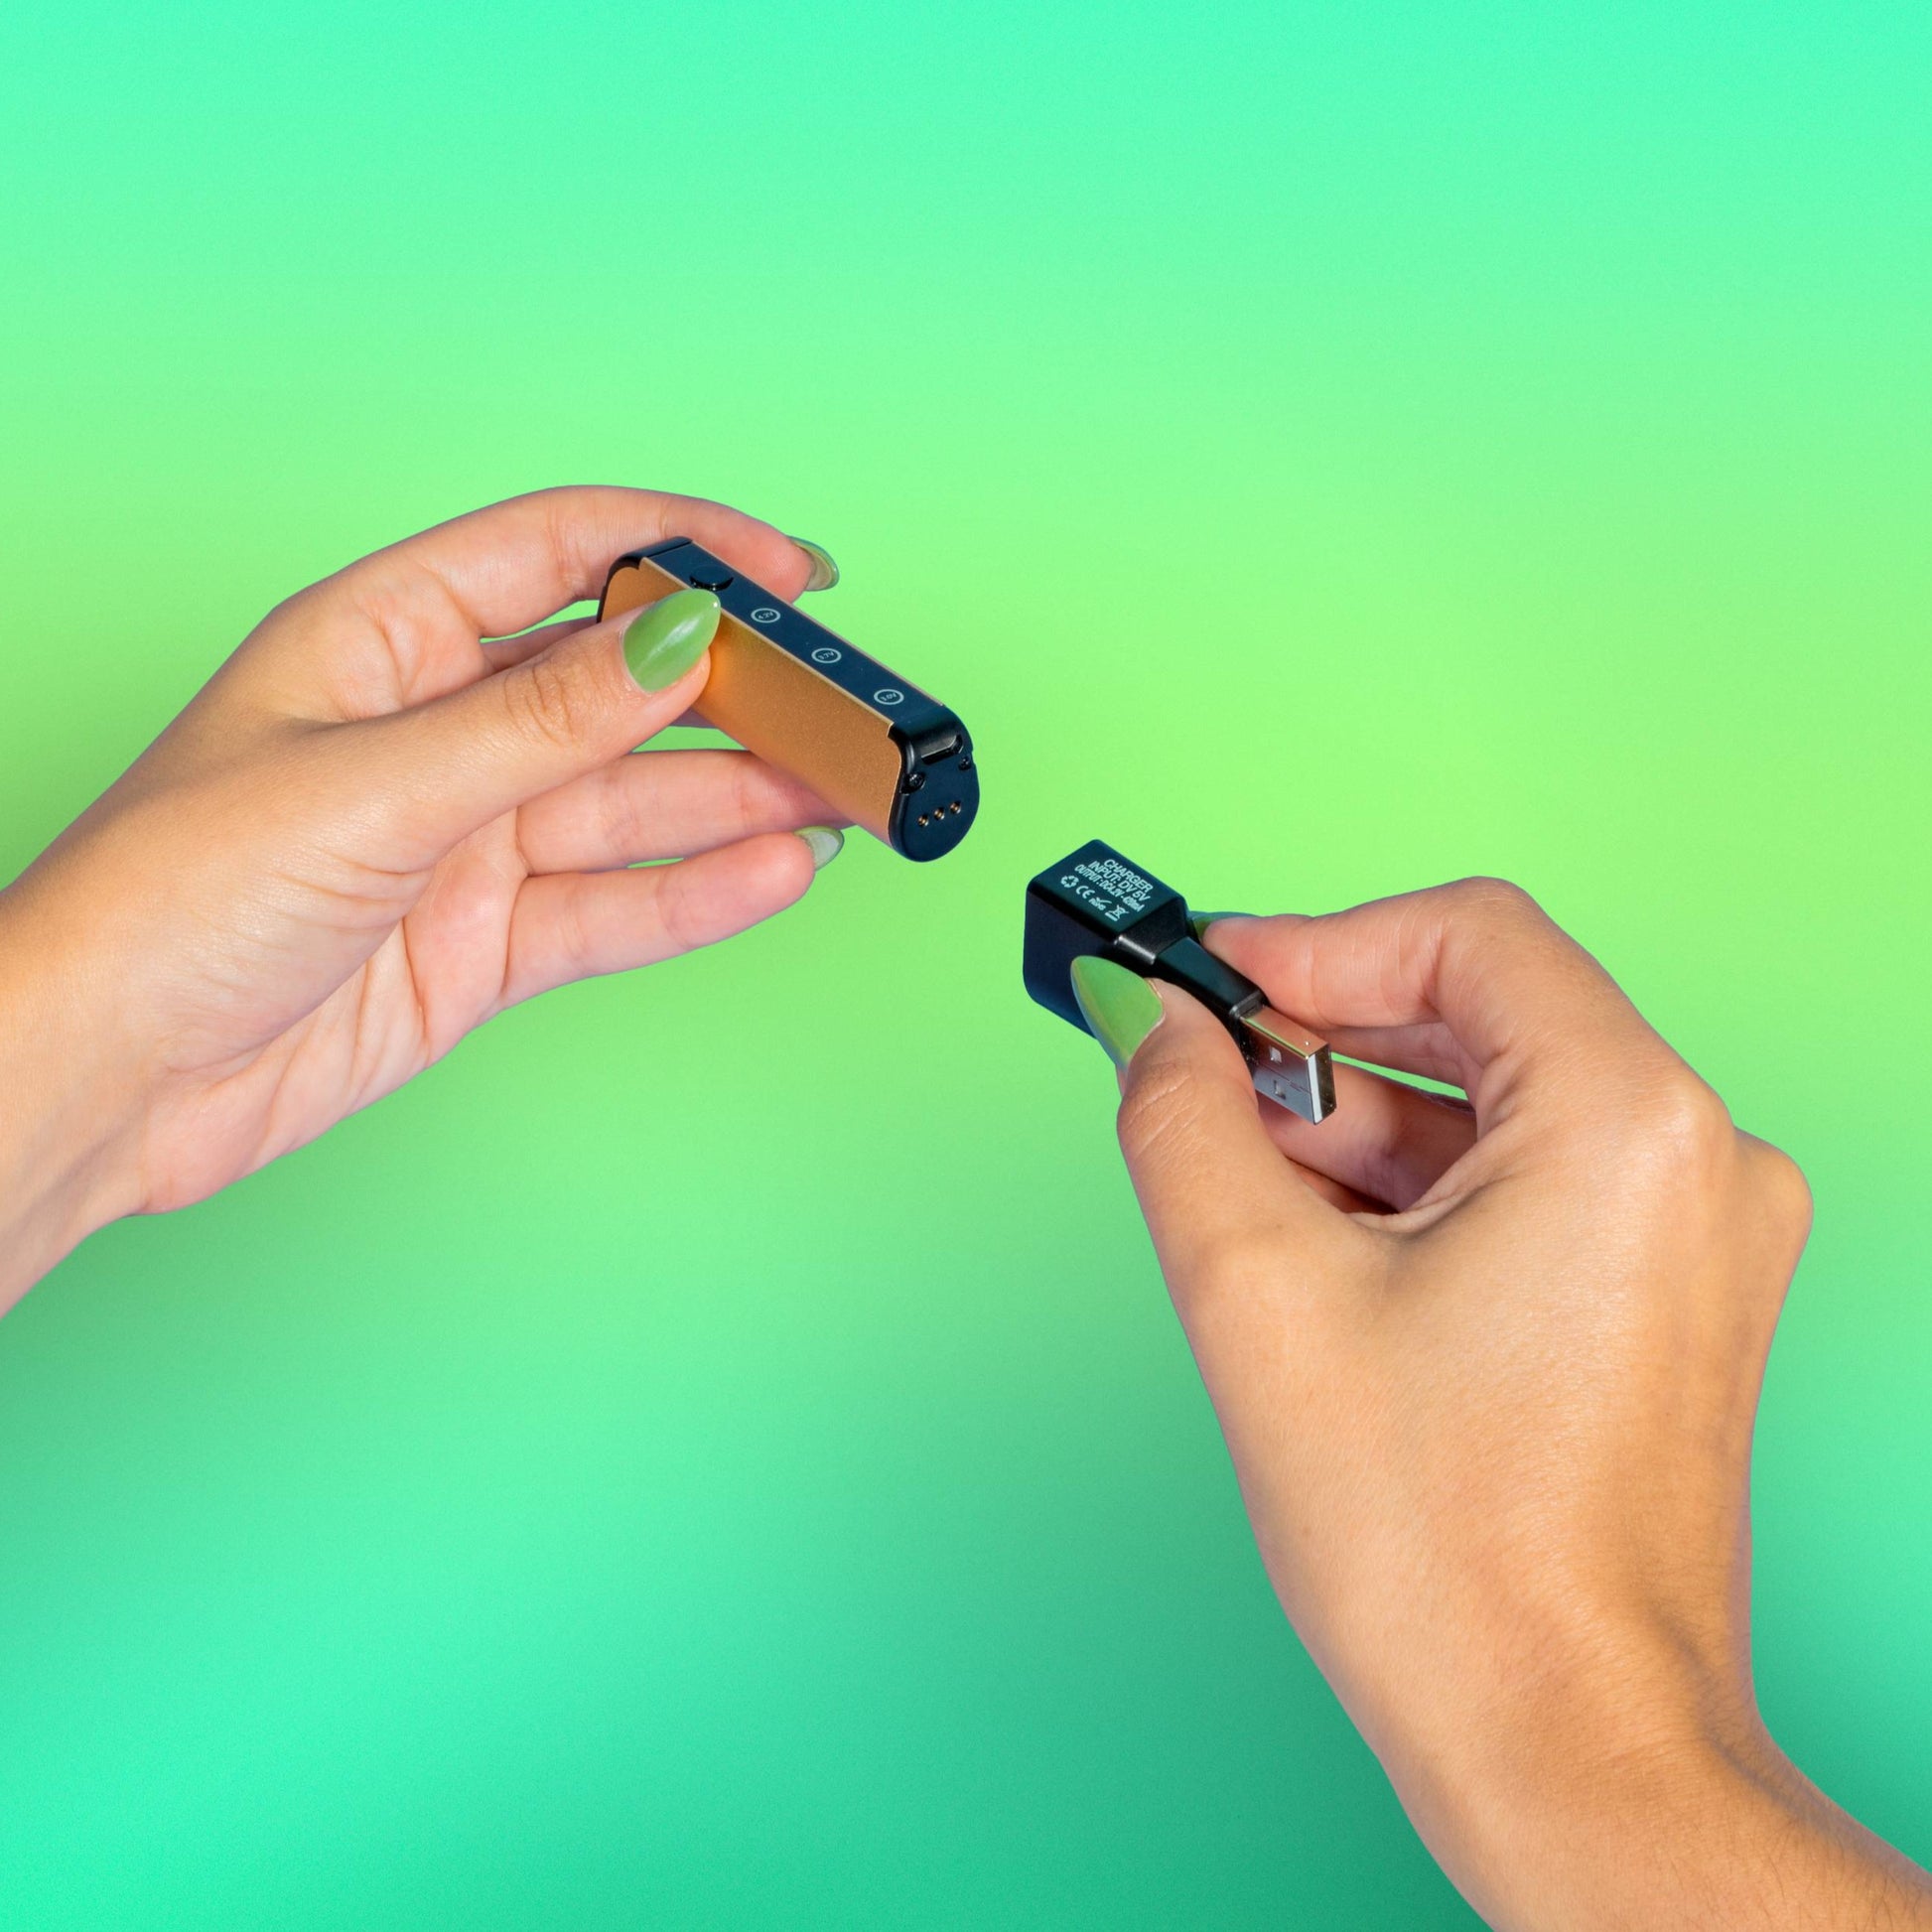 A girl with green nails attaches the magnetic charger to an Ooze Novex